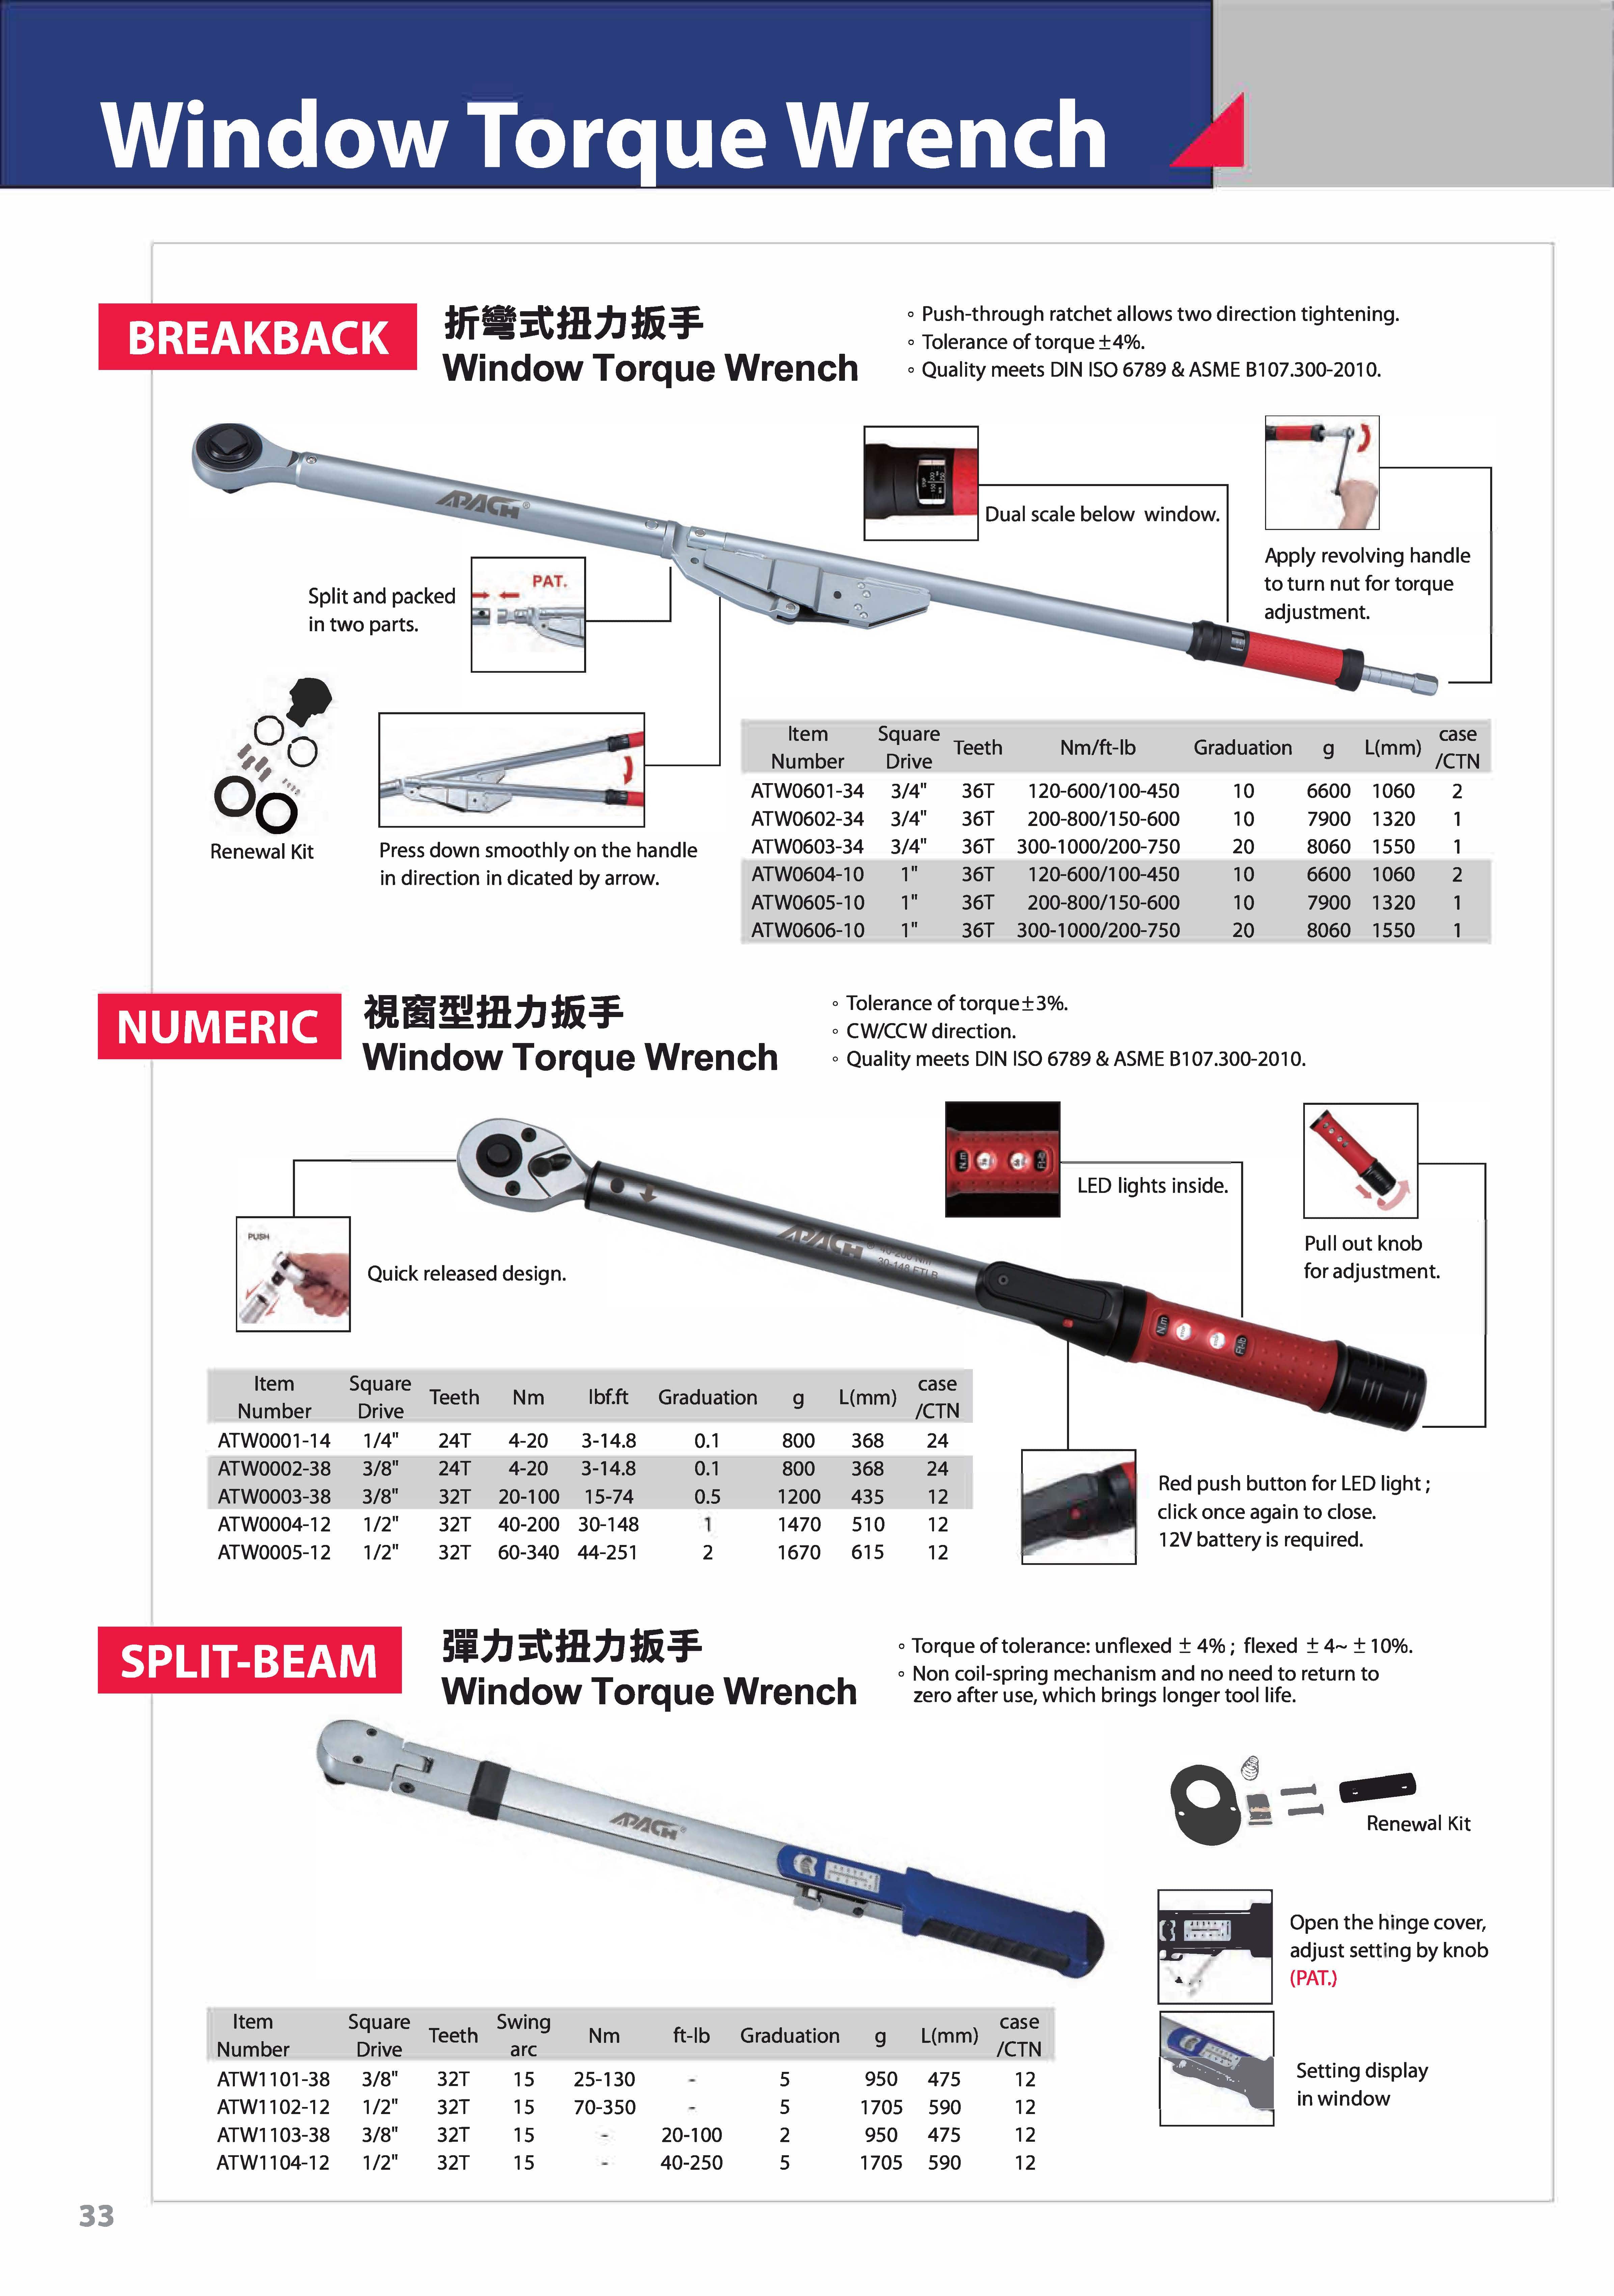 APACH-Torque Wrench